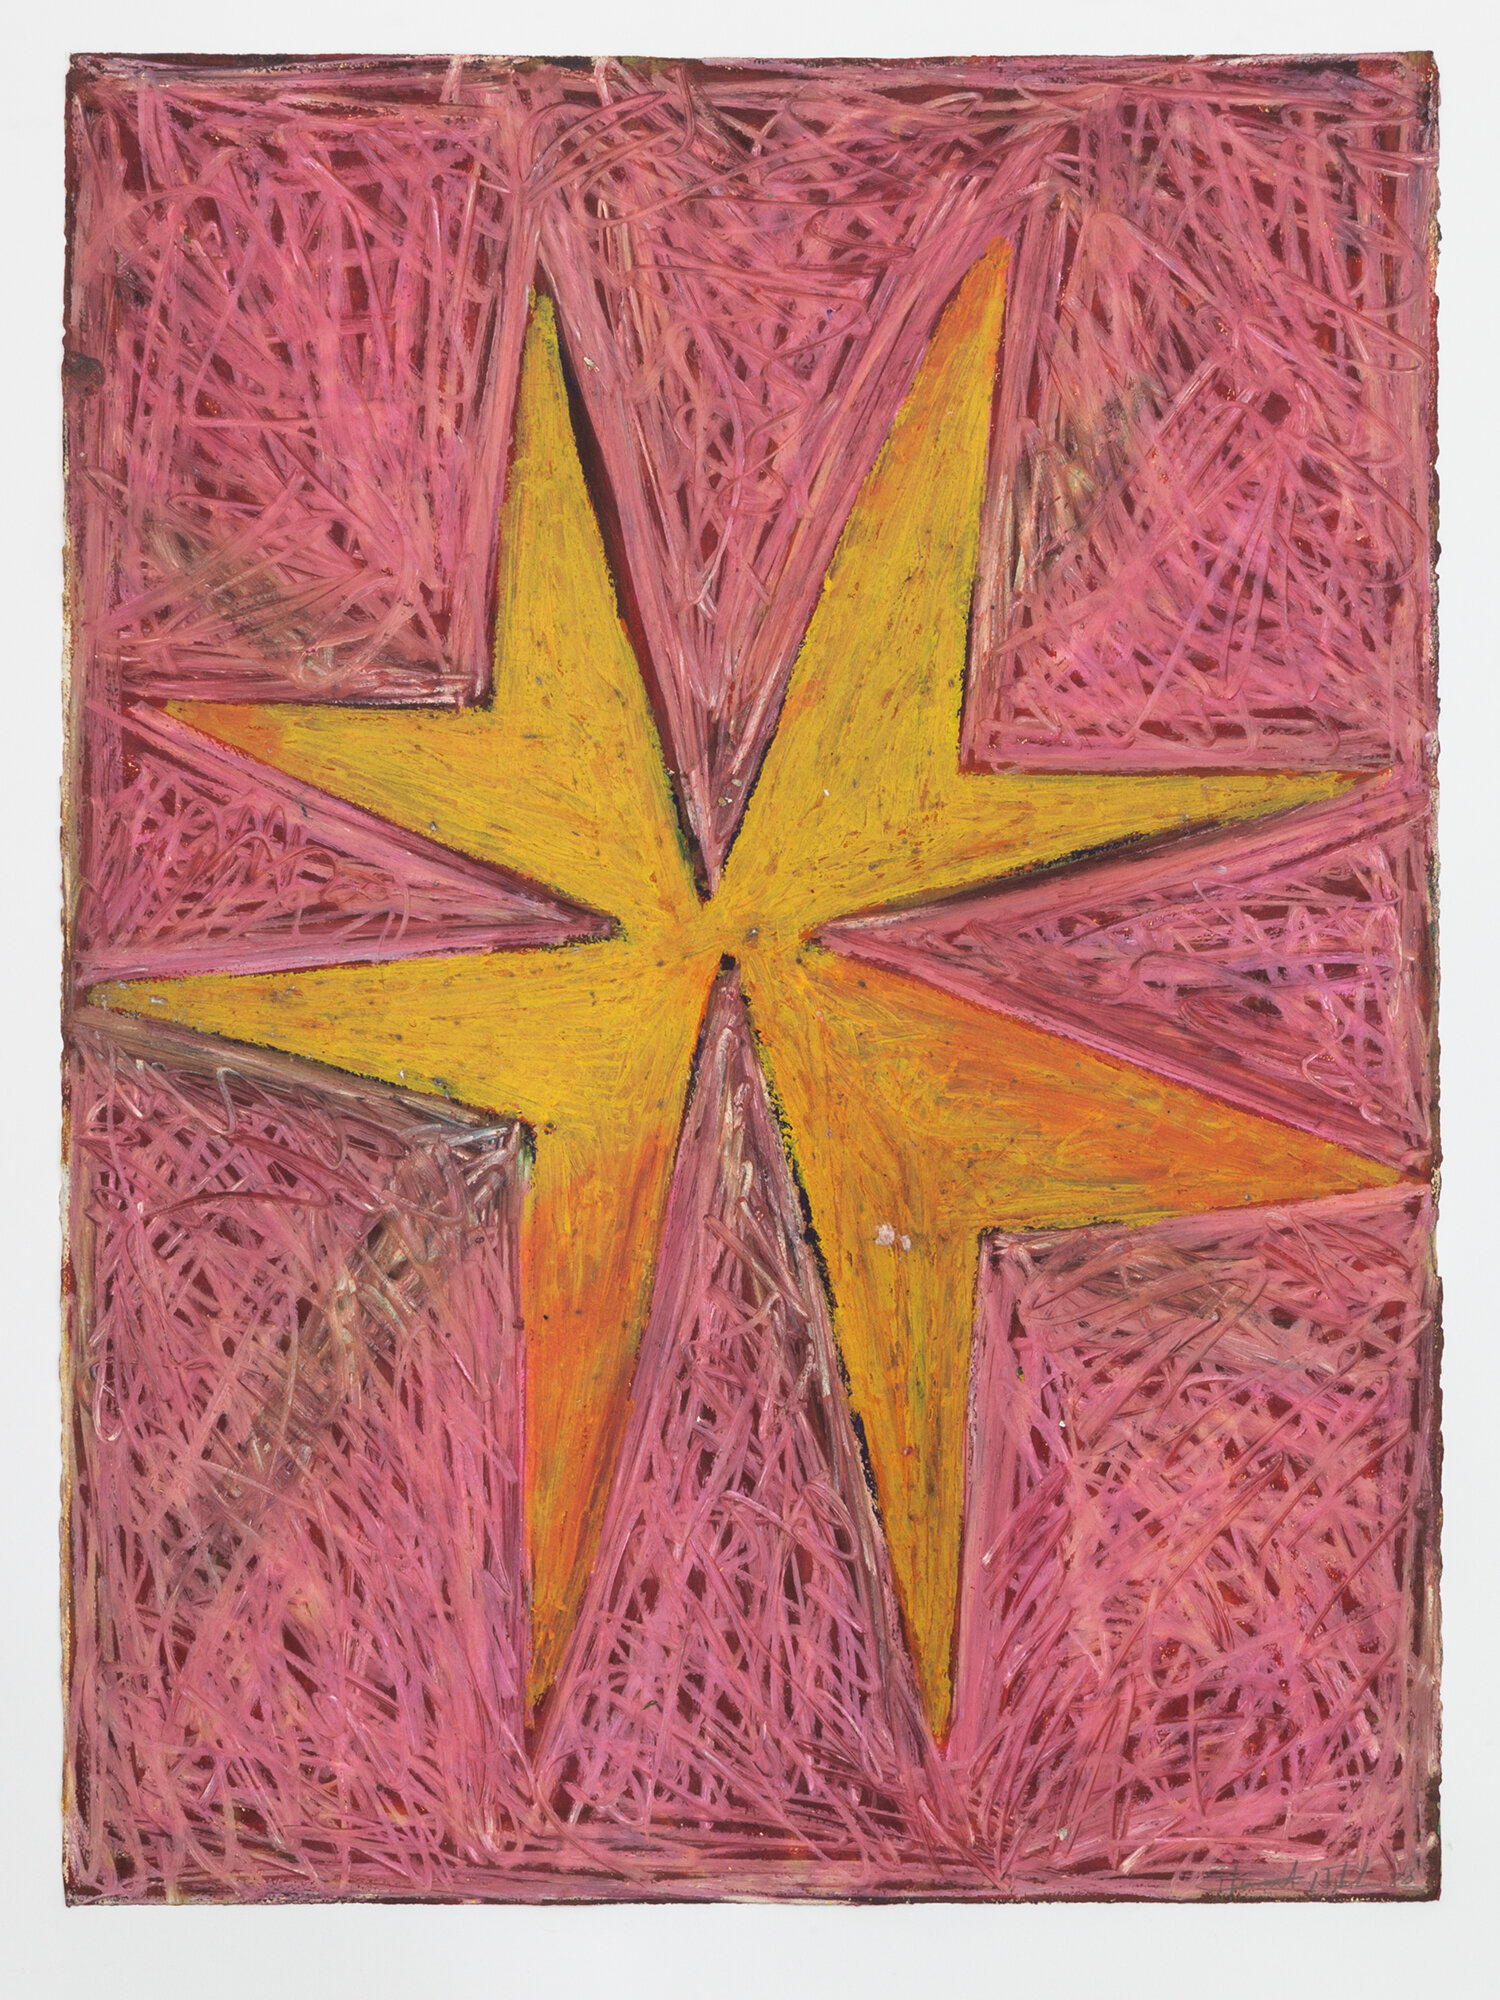  Stewart Hitch,  Untitled , 1980, Oil stick on paper 30 x 22 inches 